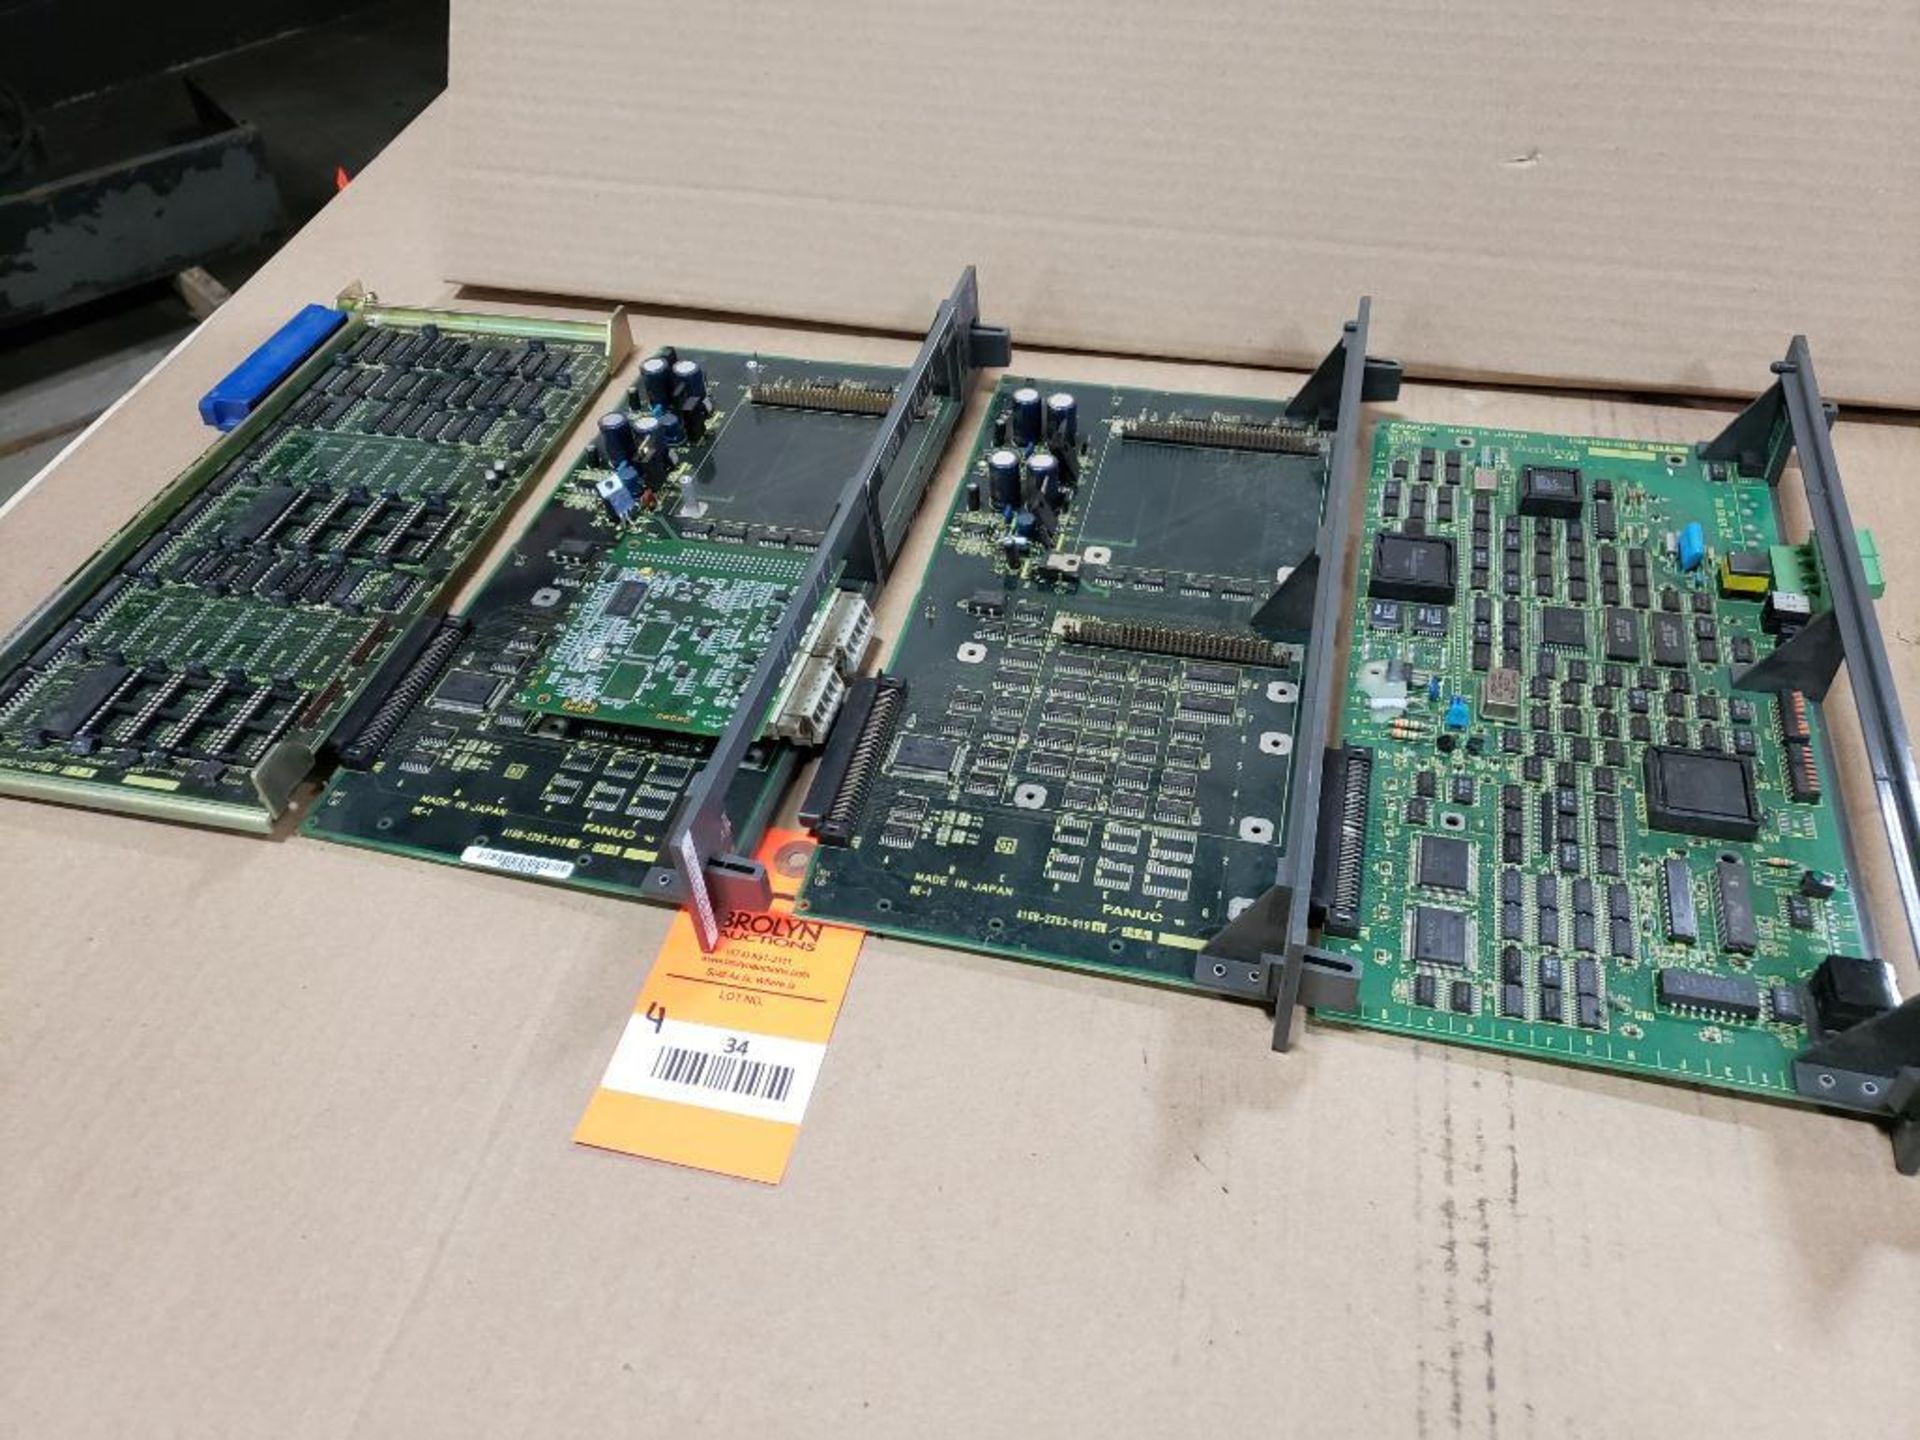 Qty 4 - Assorted Fanuc control boards. - Image 10 of 10